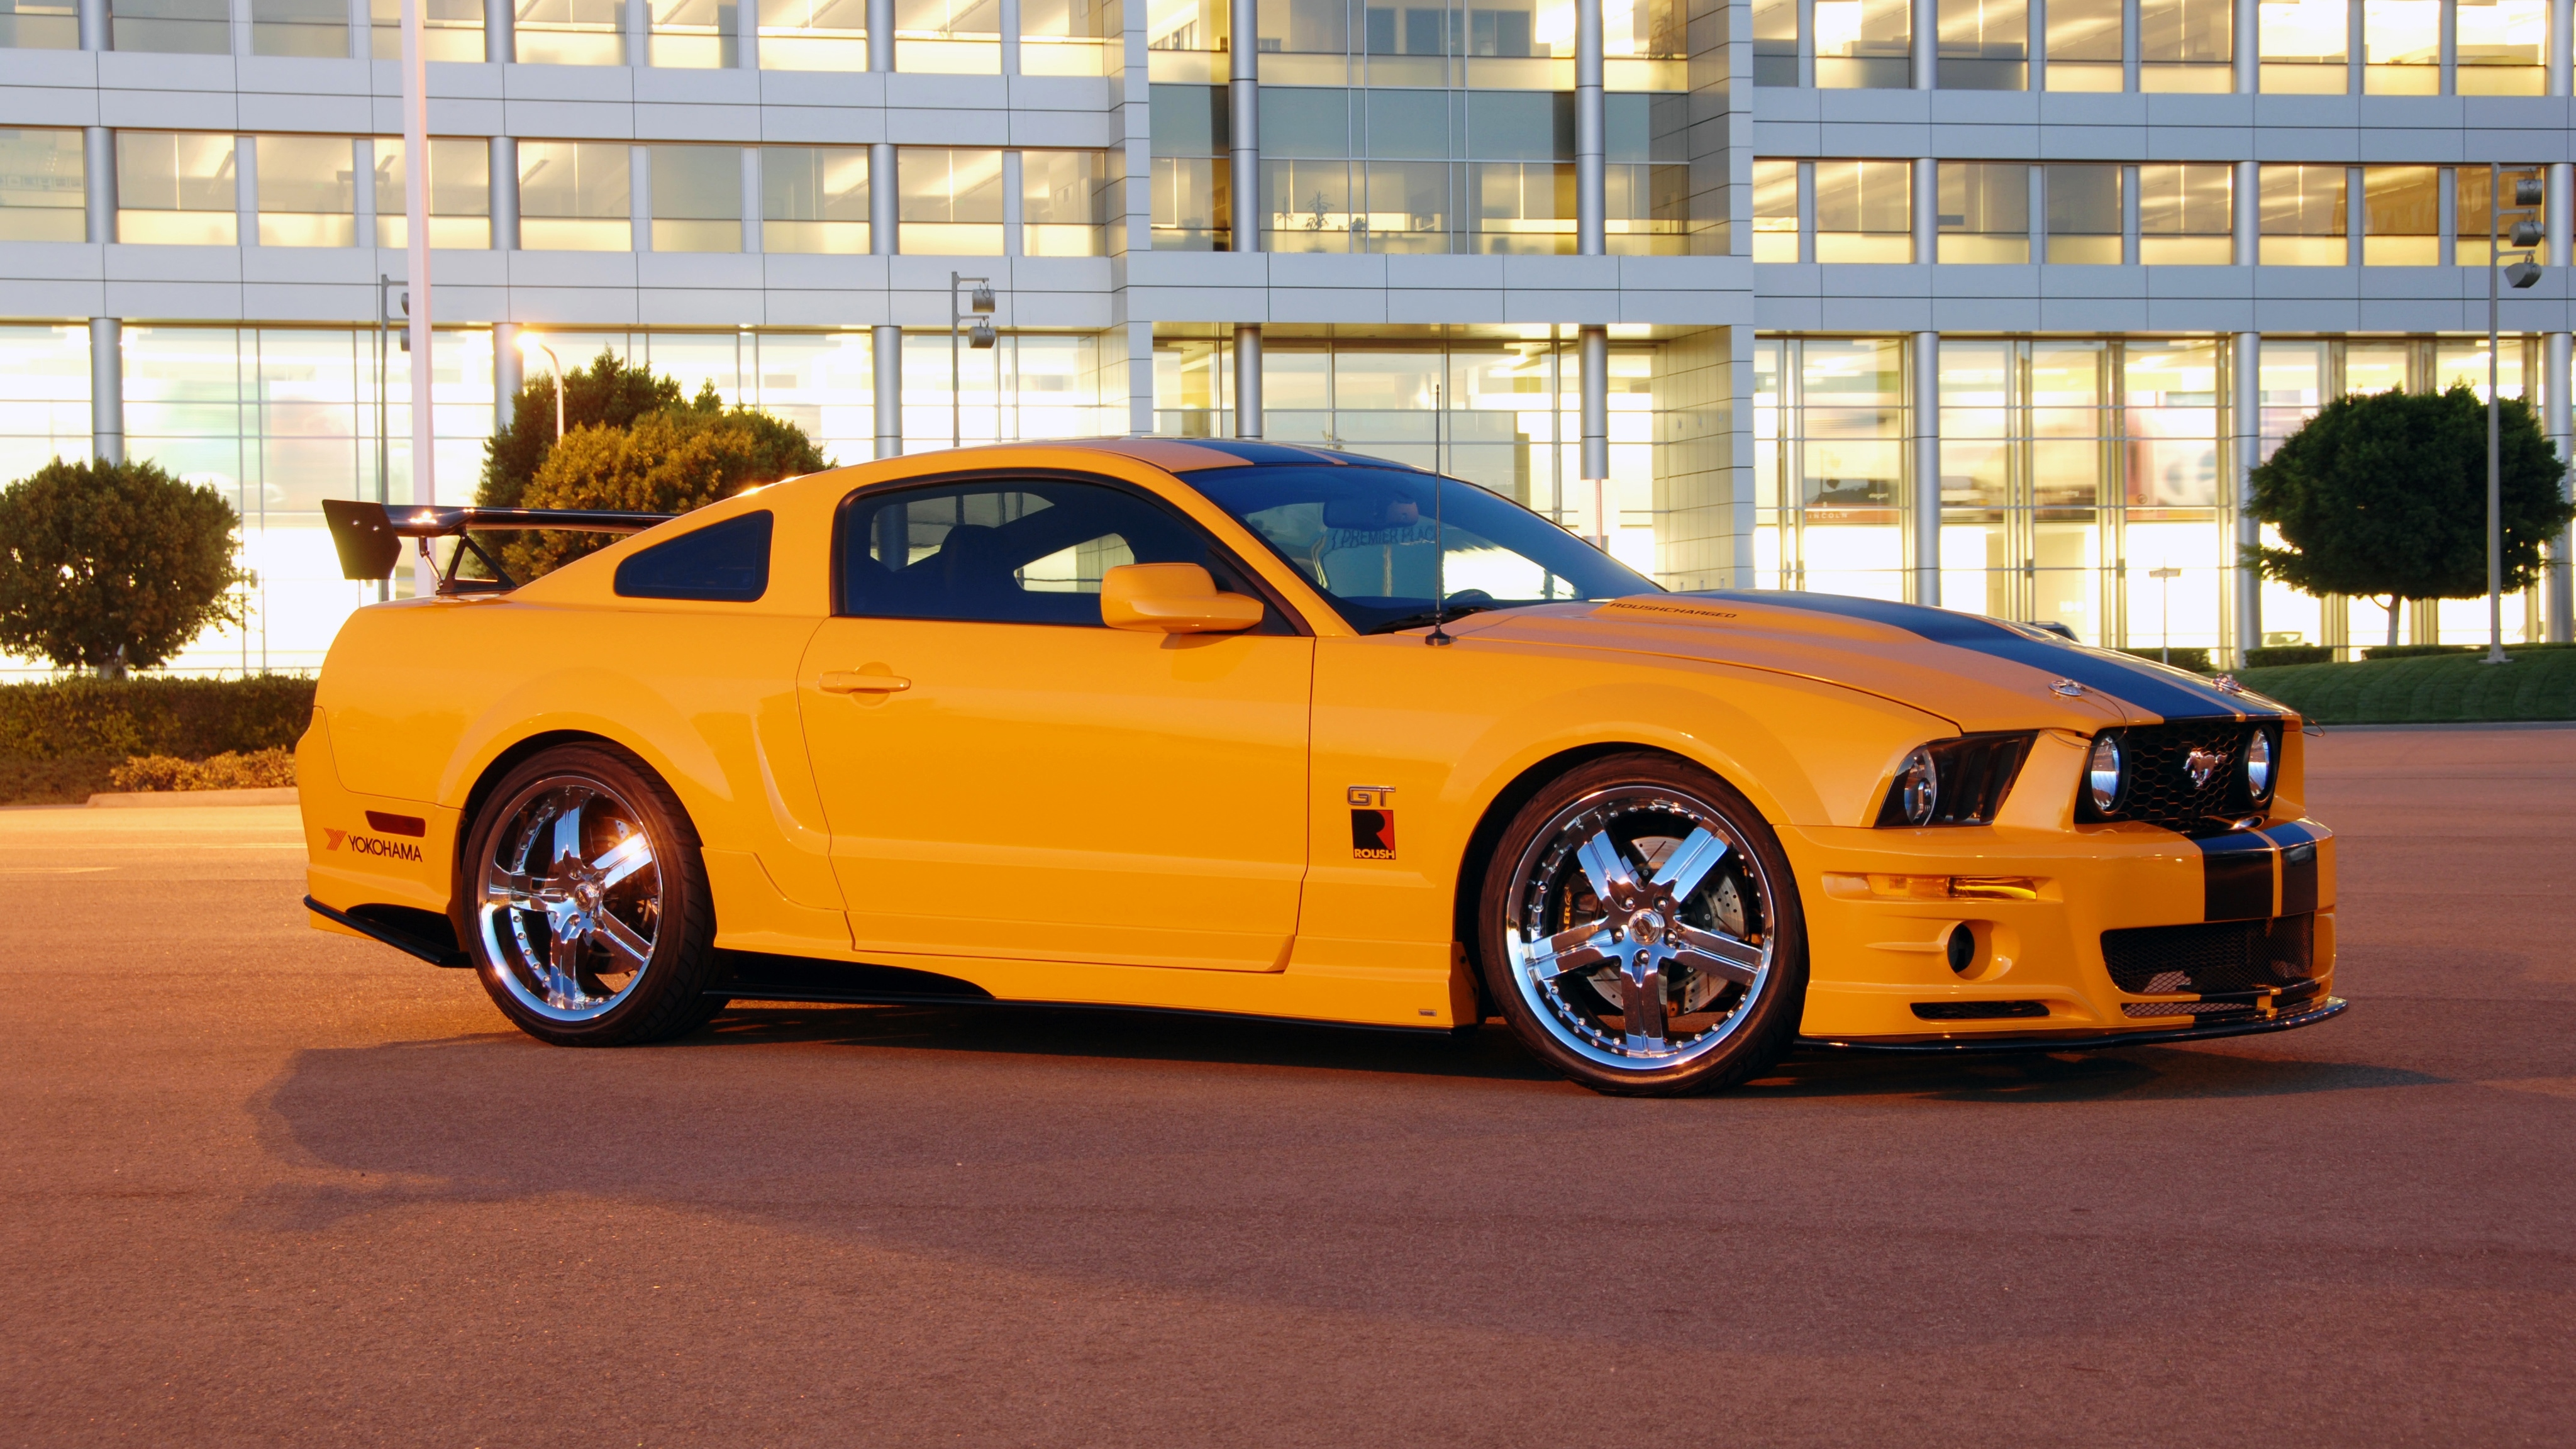 Car Ford Ford Mustang Ford Mustang Shelby Muscle Car Vehicle 4096x2304